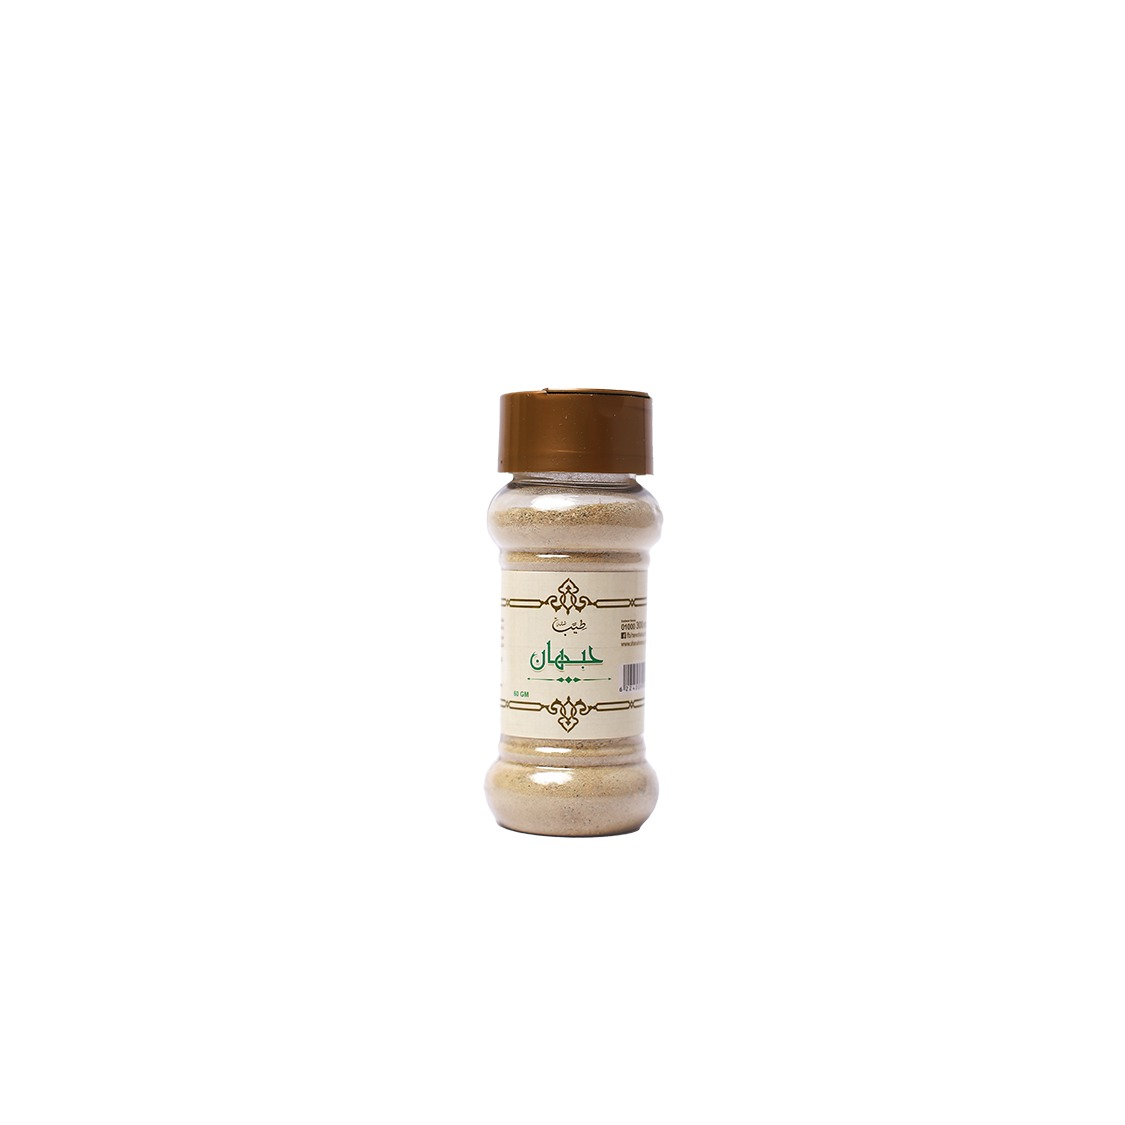 Cardamom (60 gm) regulates digestive system for the treatment of cold By shana